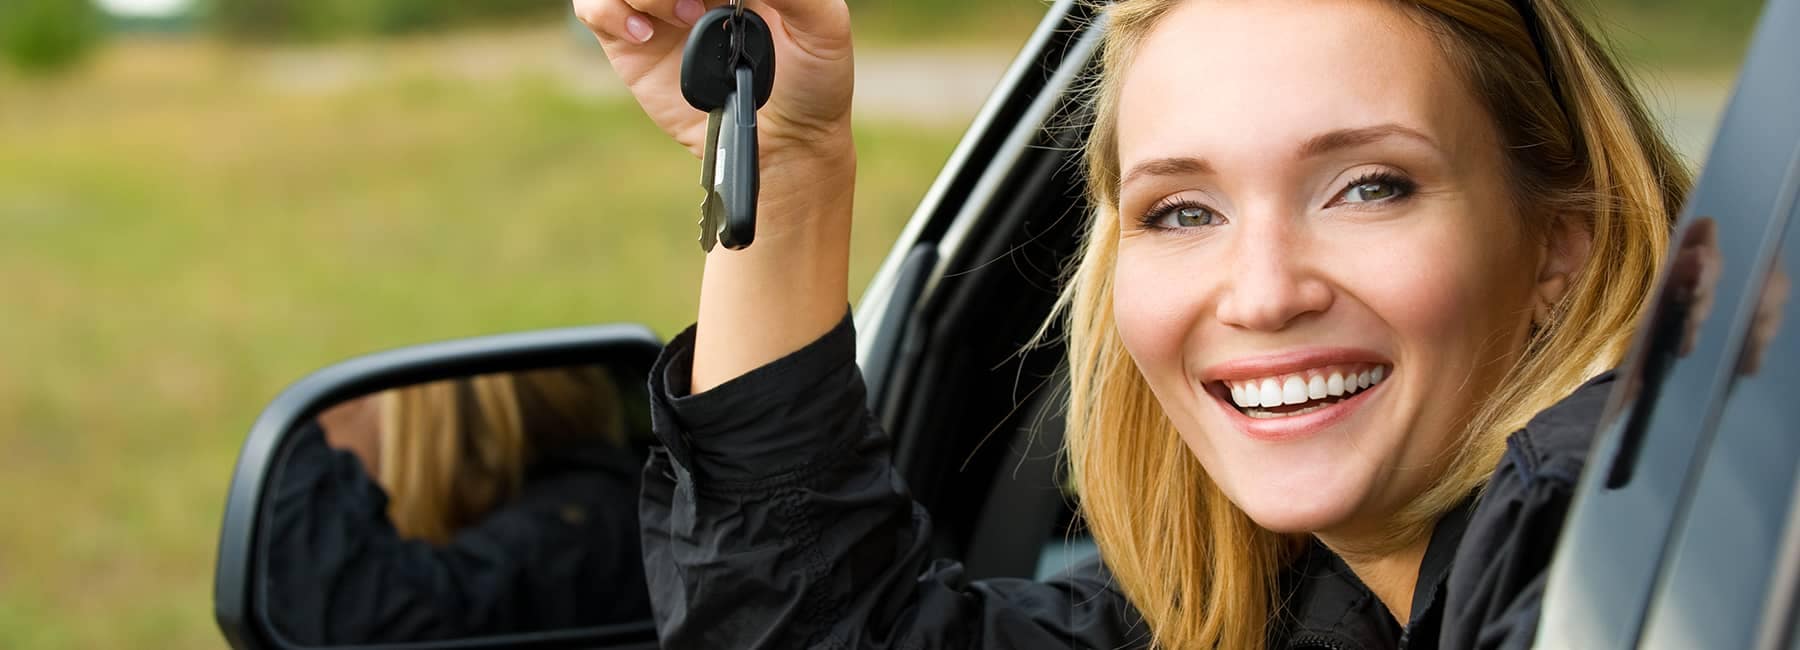 woman leaning out of car smiling with her car keys